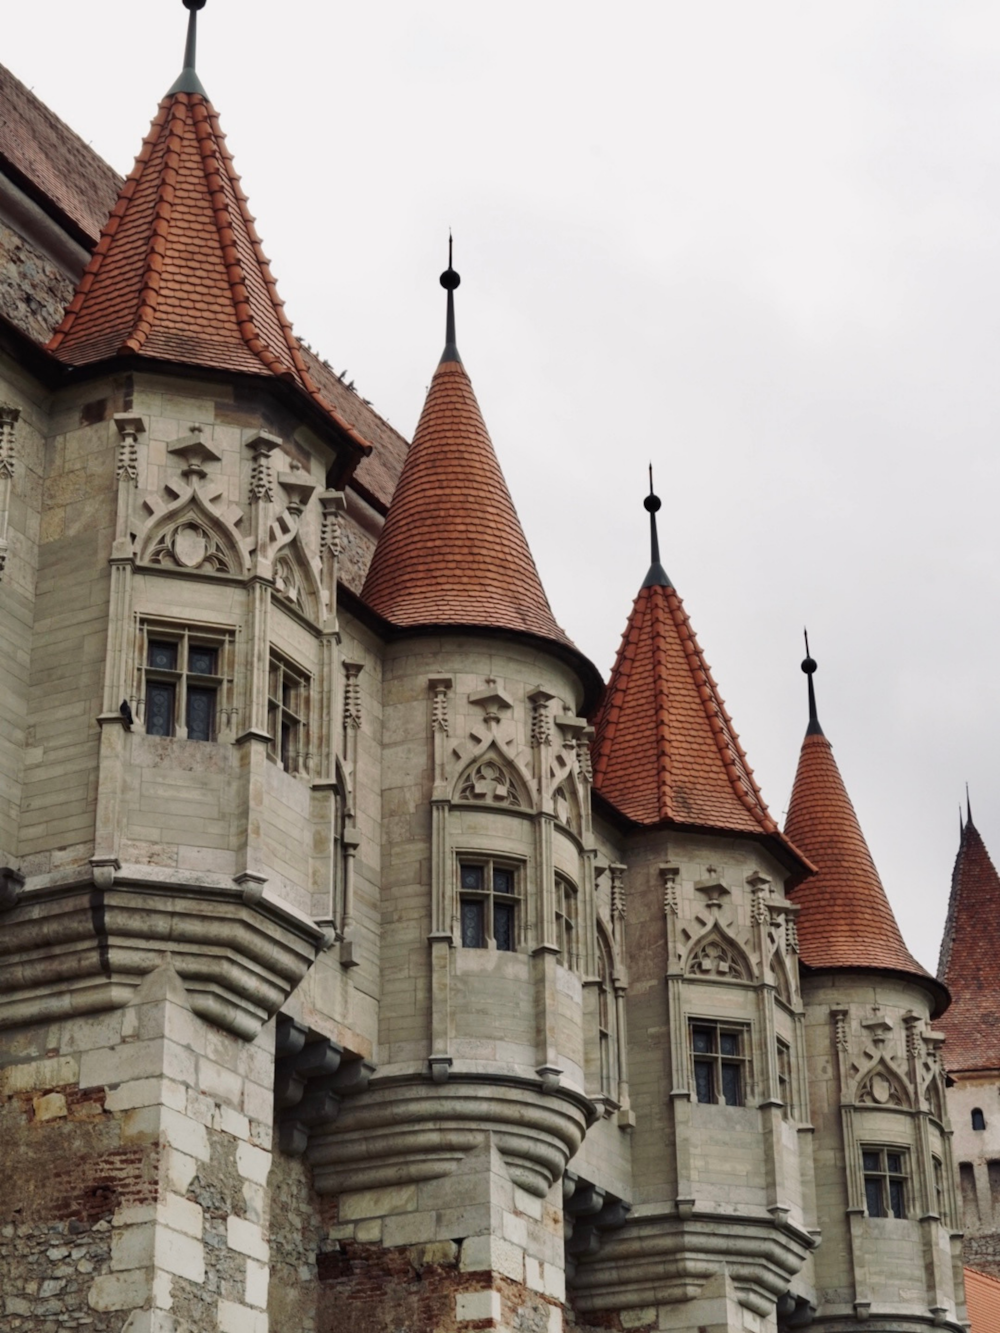 a row of old castle like buildings on a cloudy day